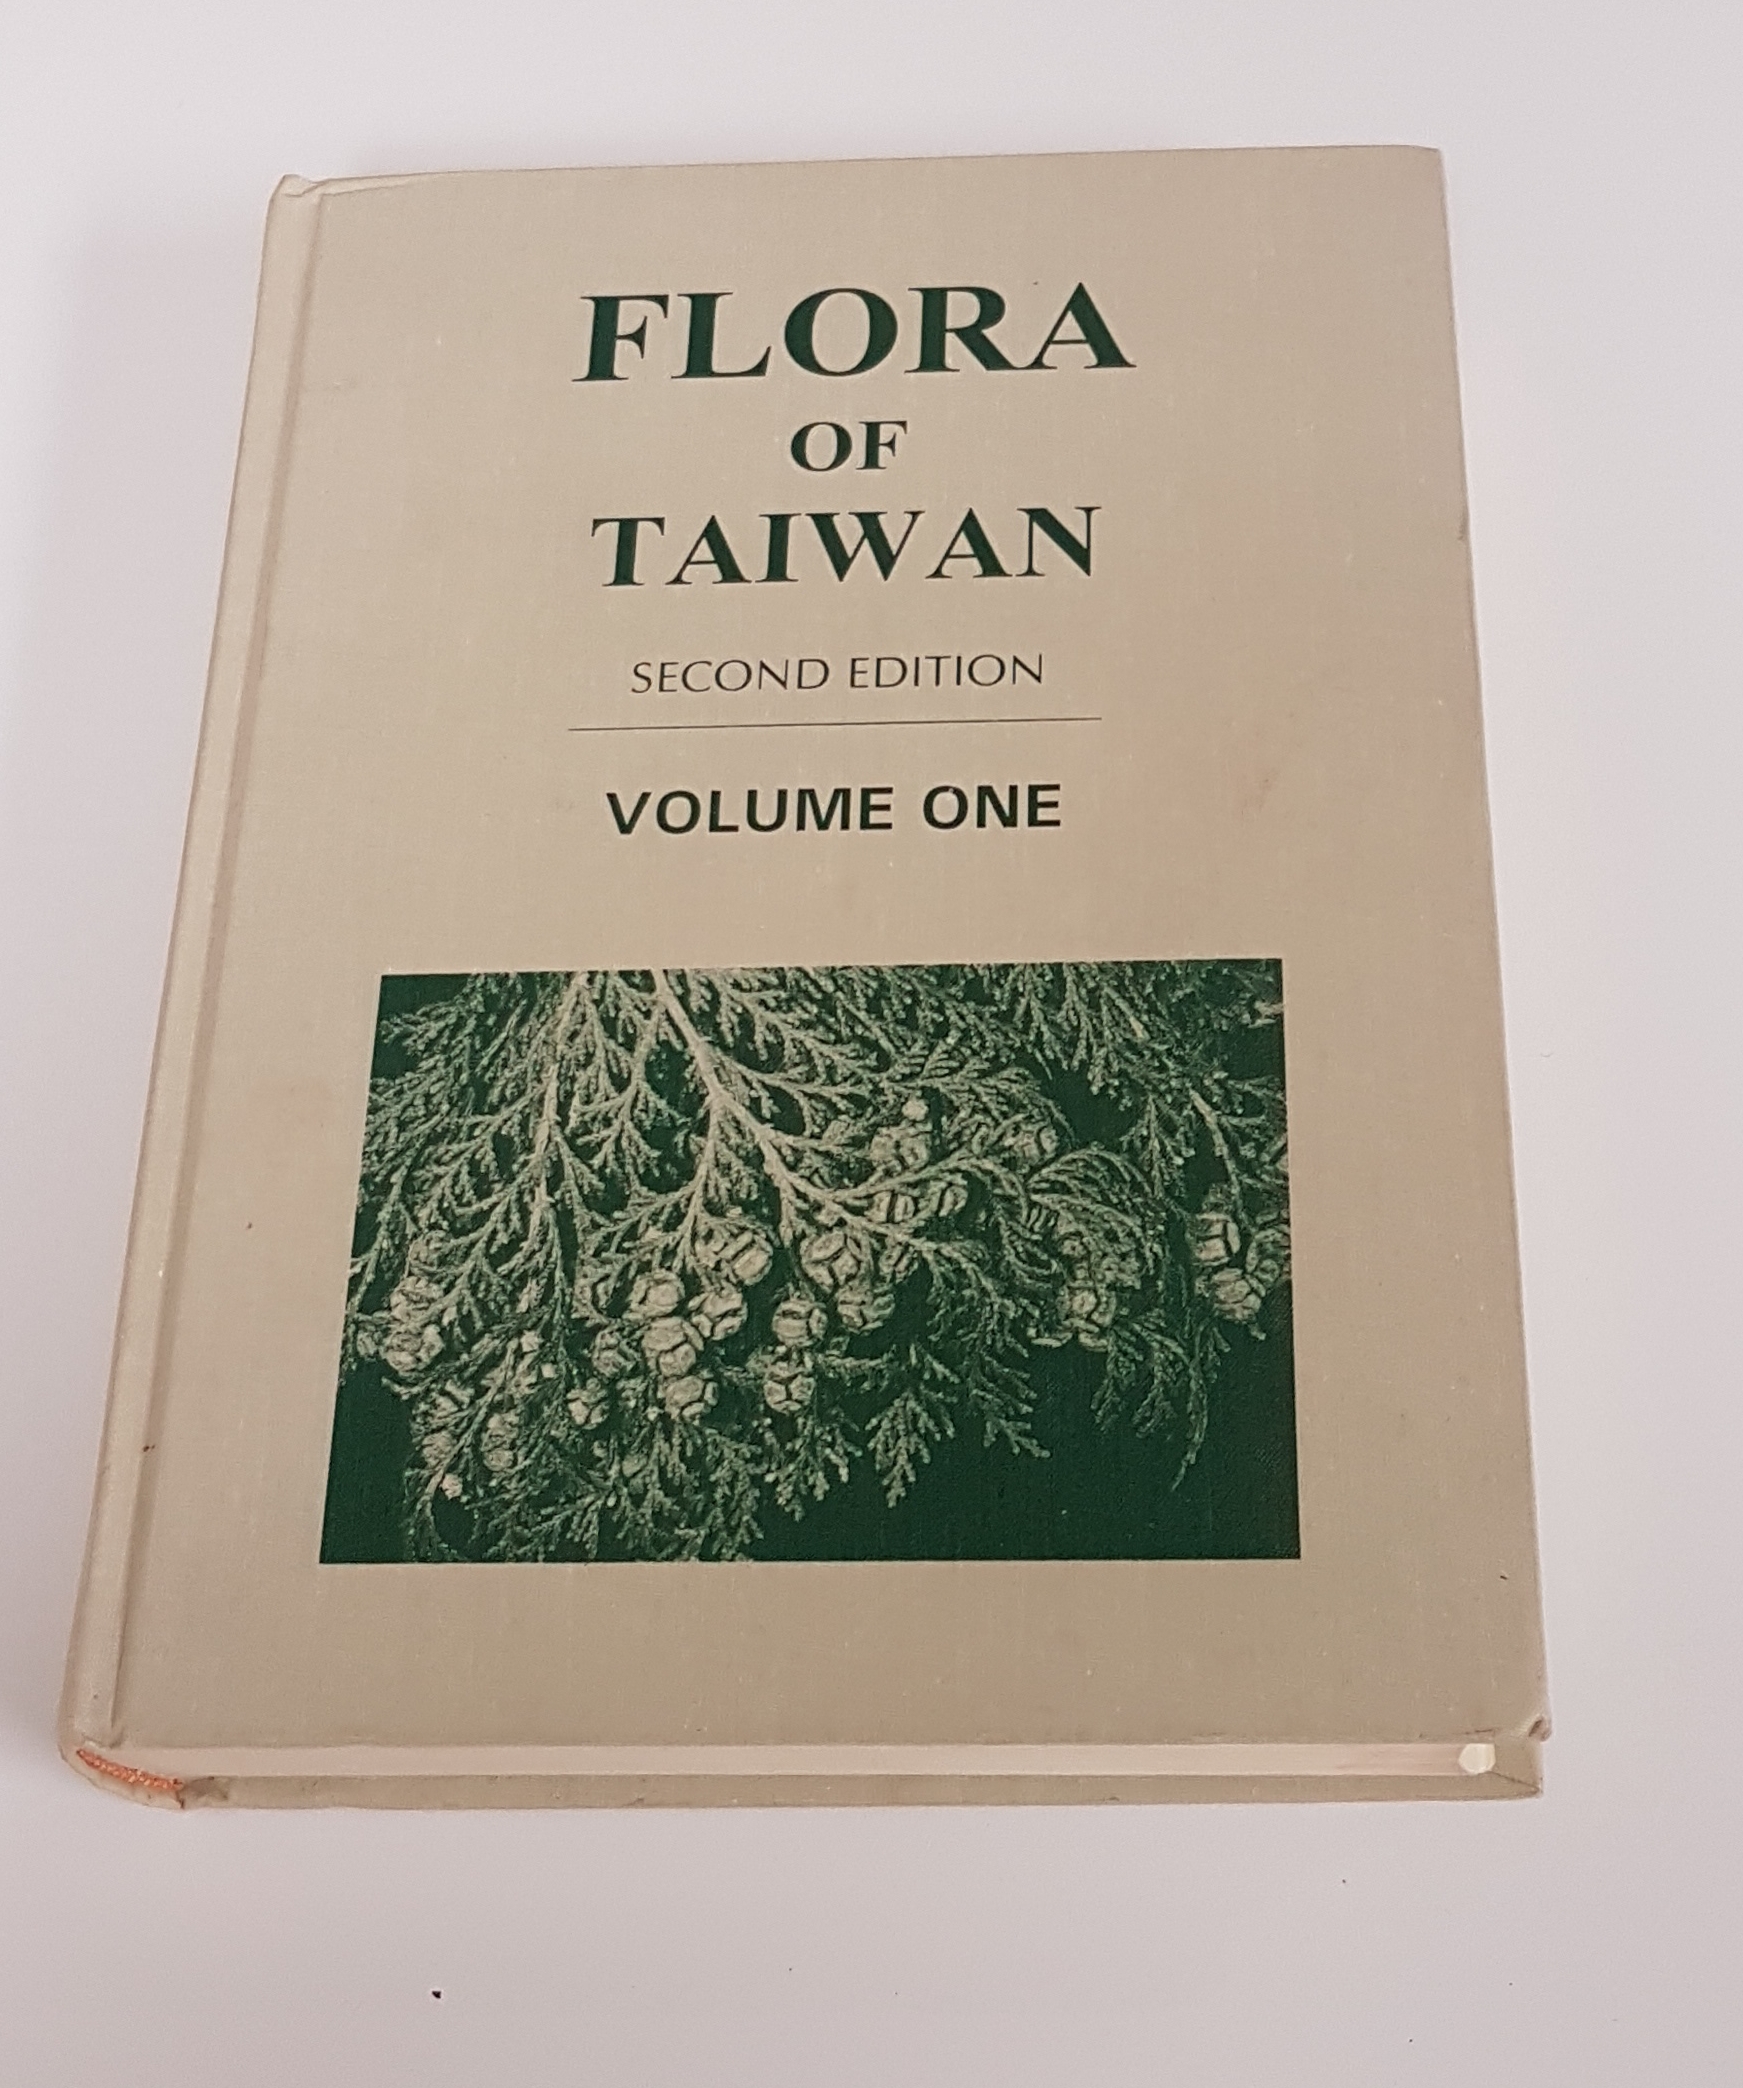 Flora of Taiwan - Volume One - Pteridophyta - Gymnospermae ***Limited Edition of 2800 Copies*** - Editorial Committee of the Flora of Taiwan (edited)